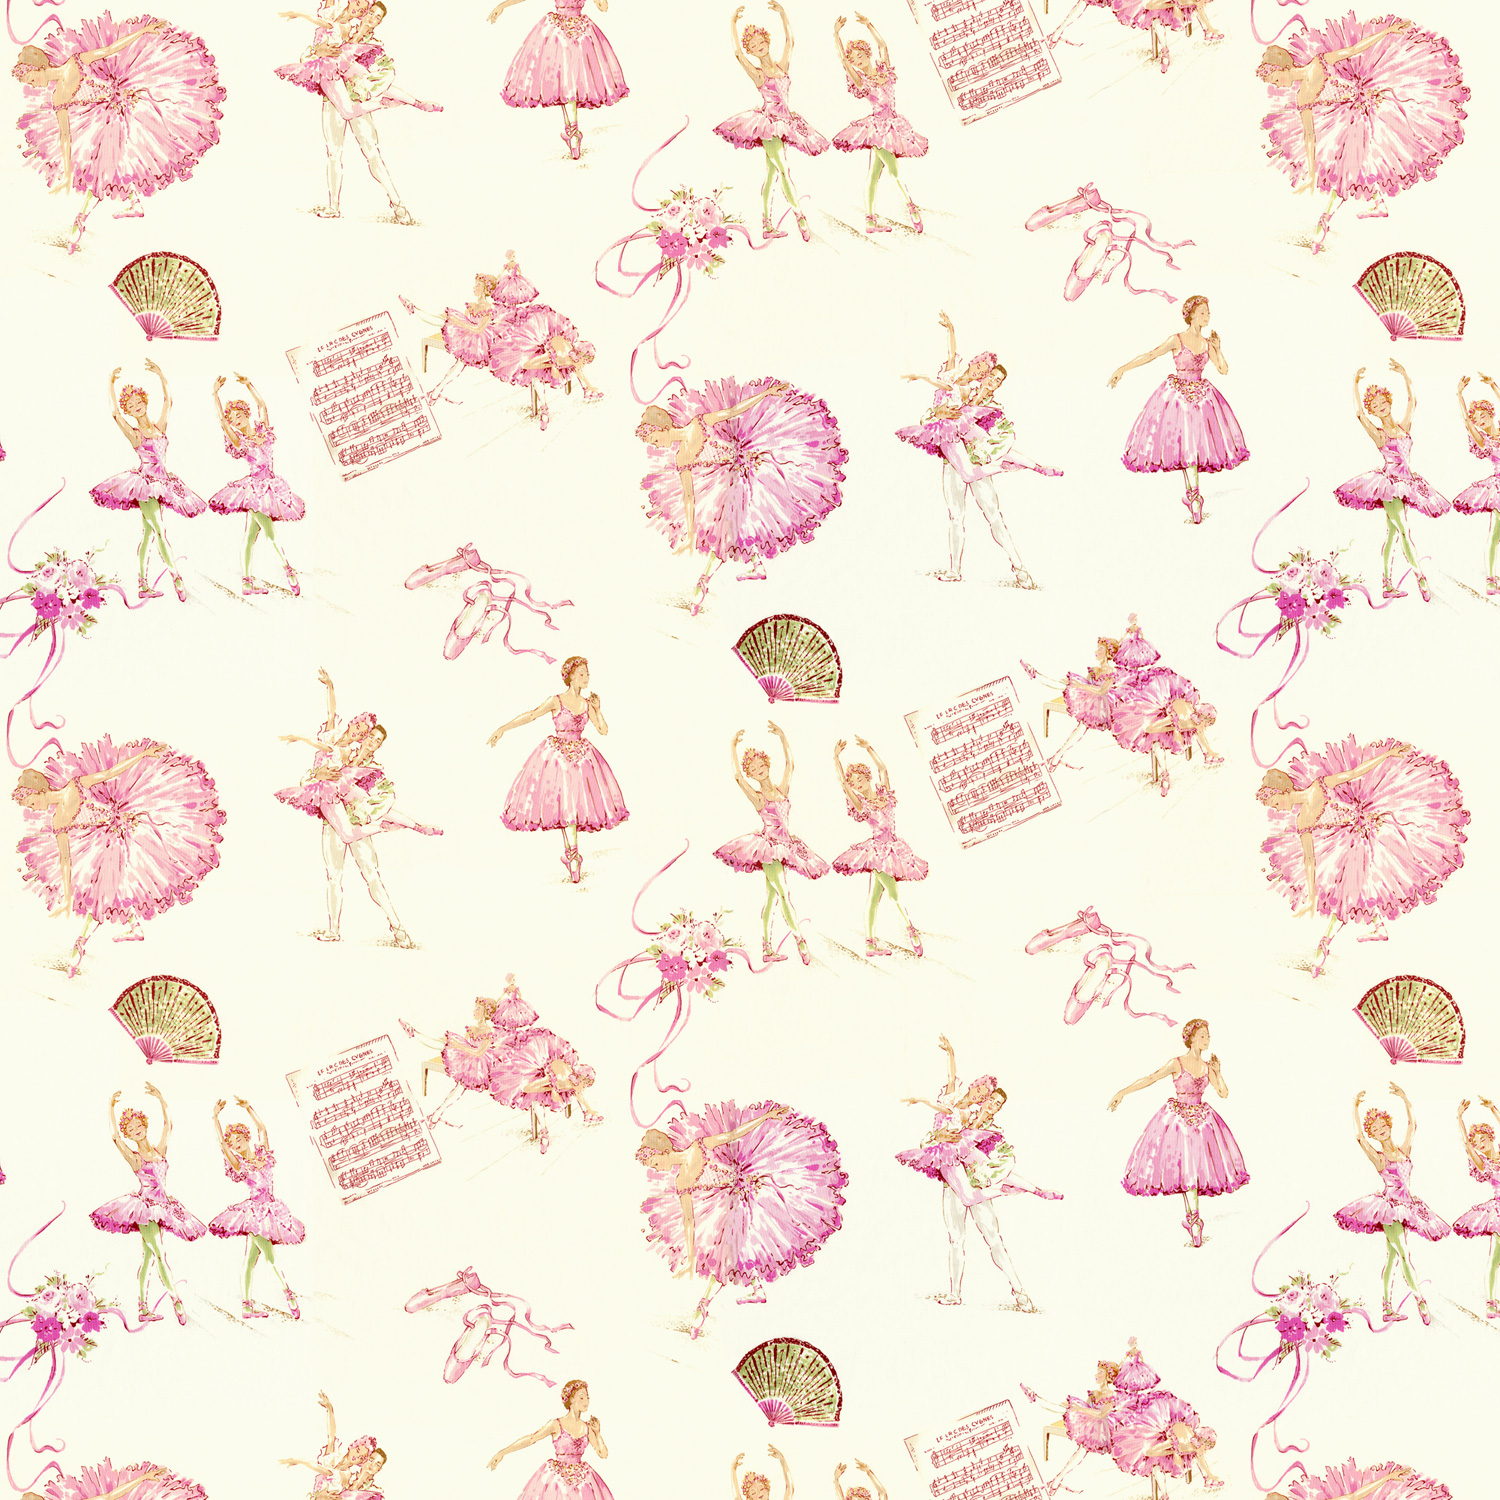 Royal Ballet Fabric By The Yard This Rare And Classic